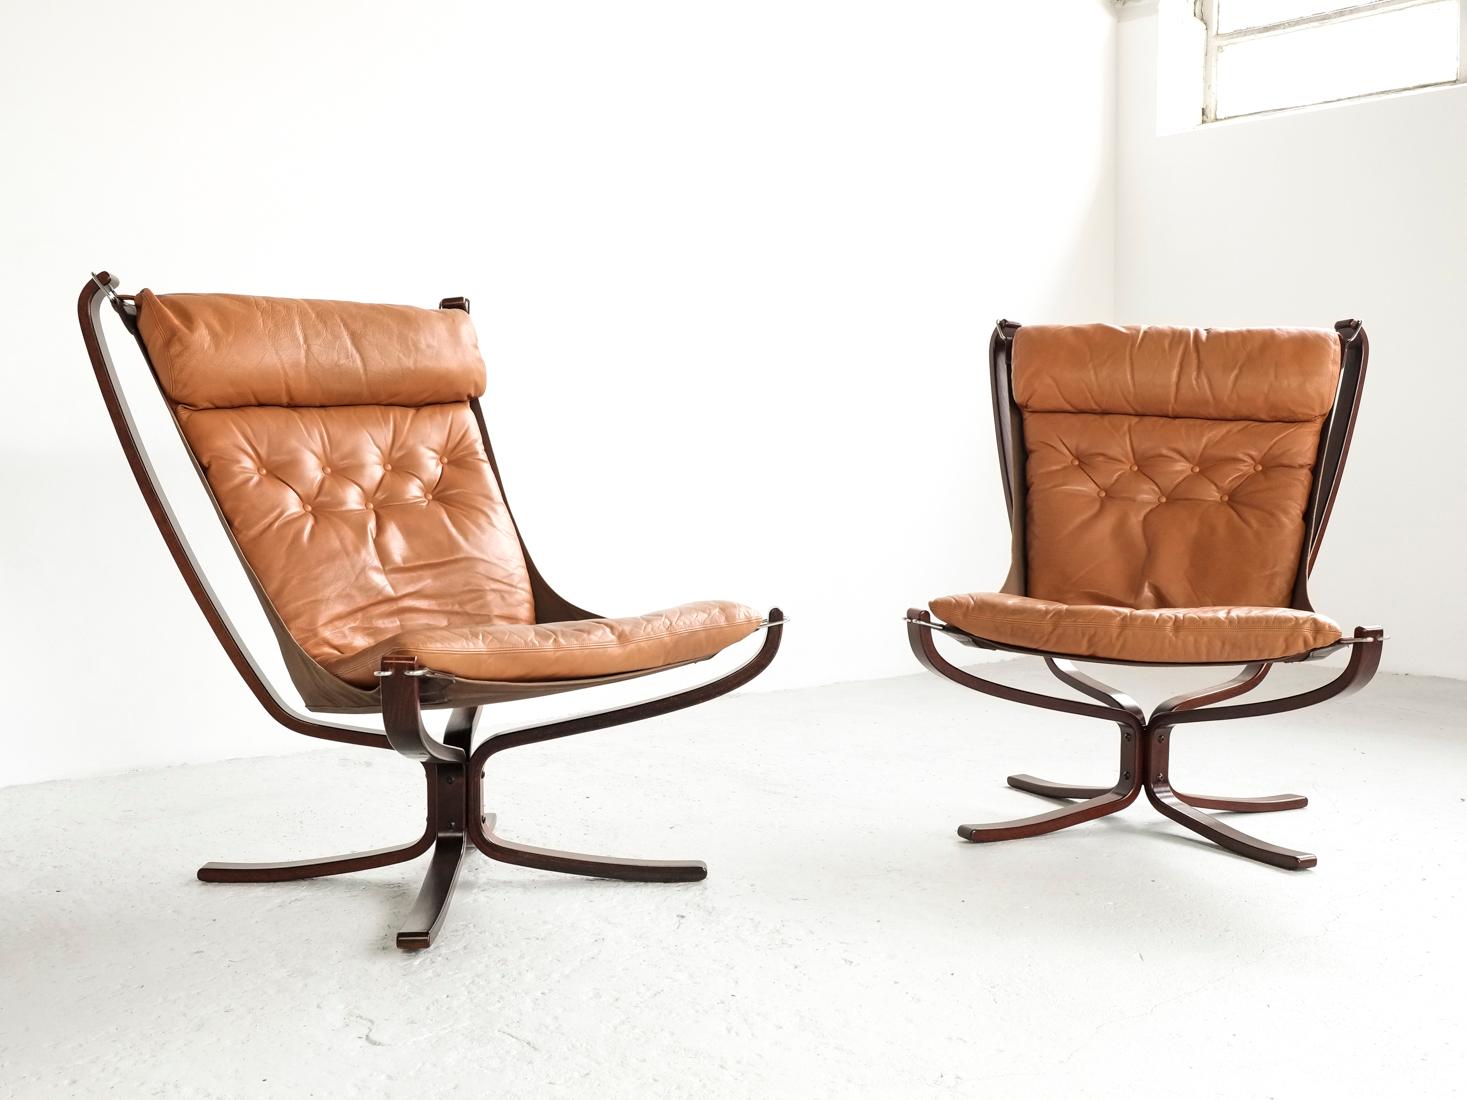 Mid-Century Modern Midcentury Pair of High-Back Falcon Chairs by Sigurd Ressell for Vatne Møbler